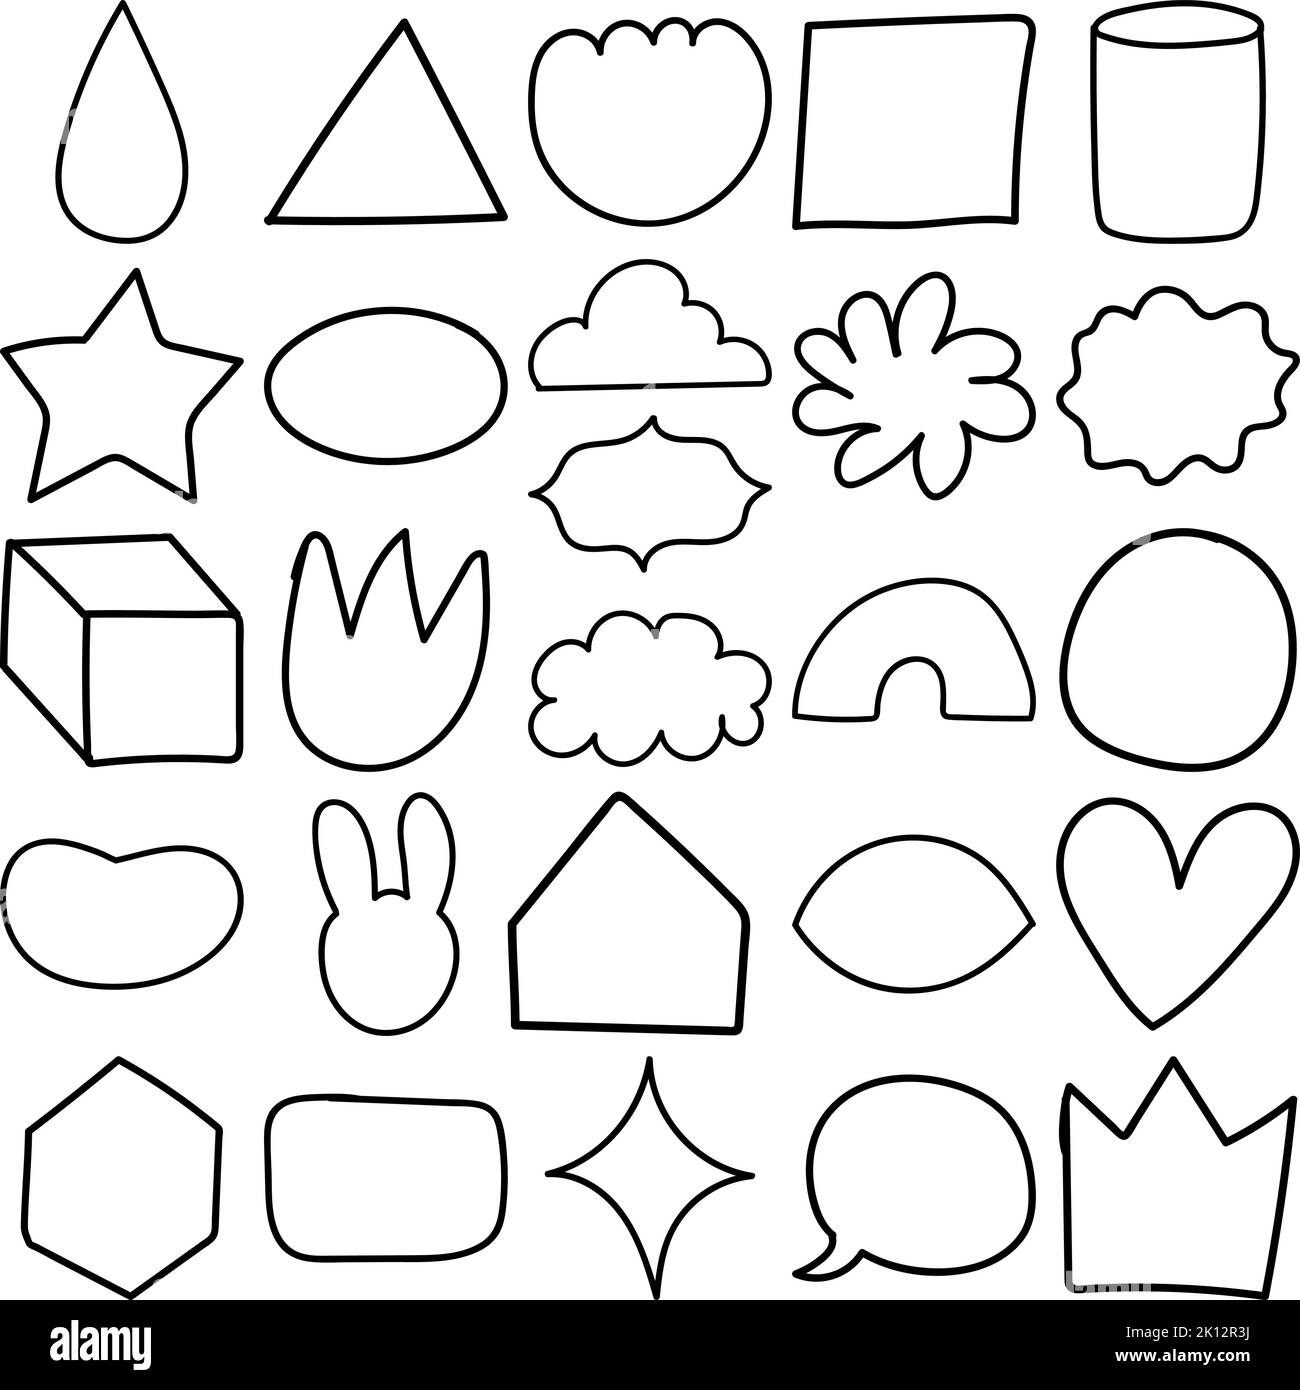 Shapes Hand Drawn Doodle Line Art Outline Set Containing shape, shapes, Triangle, Circle, Semi-Circle, Square, Rectangle, Parallelogram, Rhombus Stock Vector